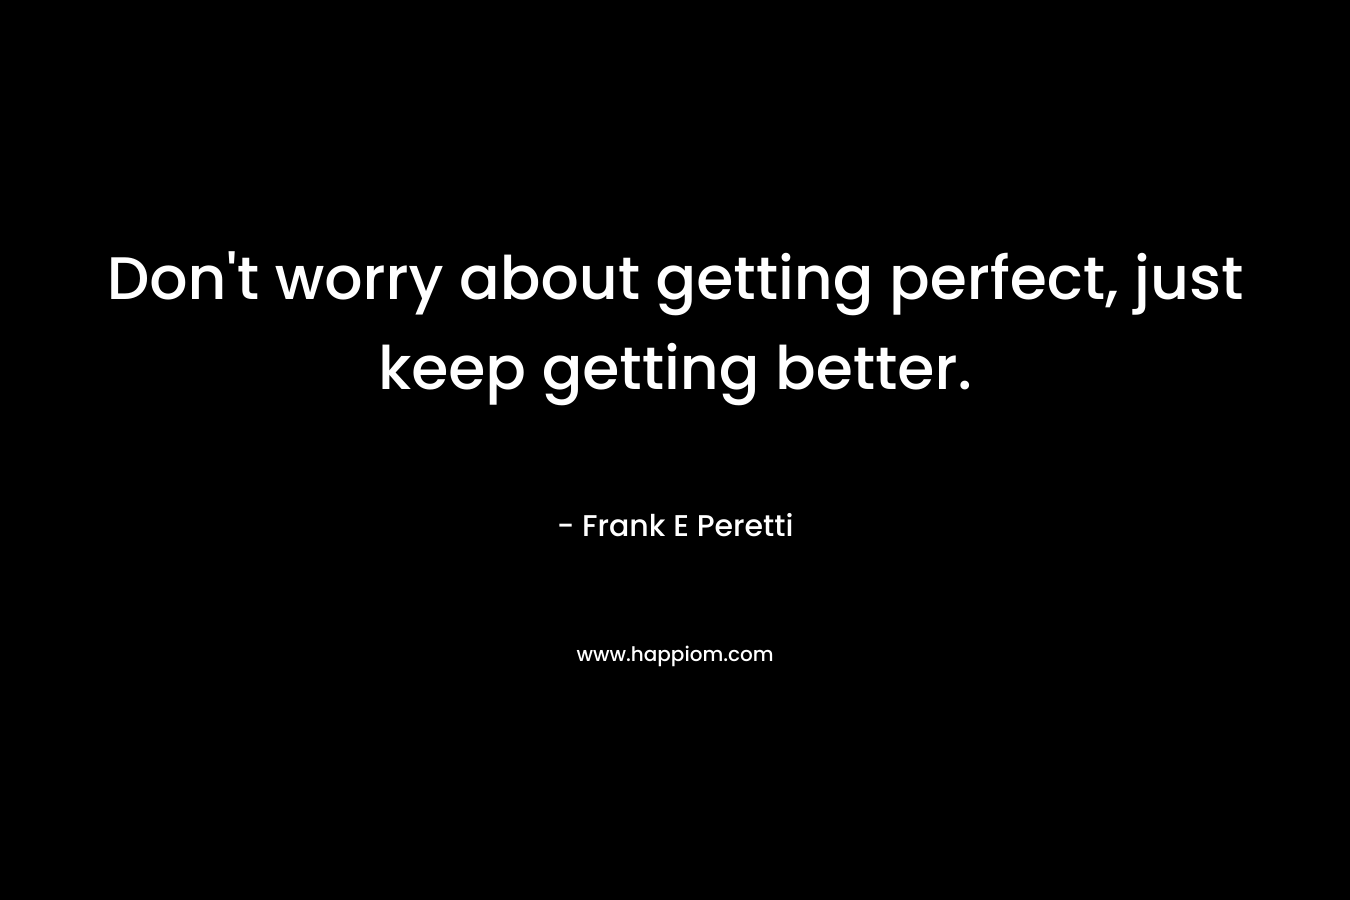 Don’t worry about getting perfect, just keep getting better. – Frank E Peretti